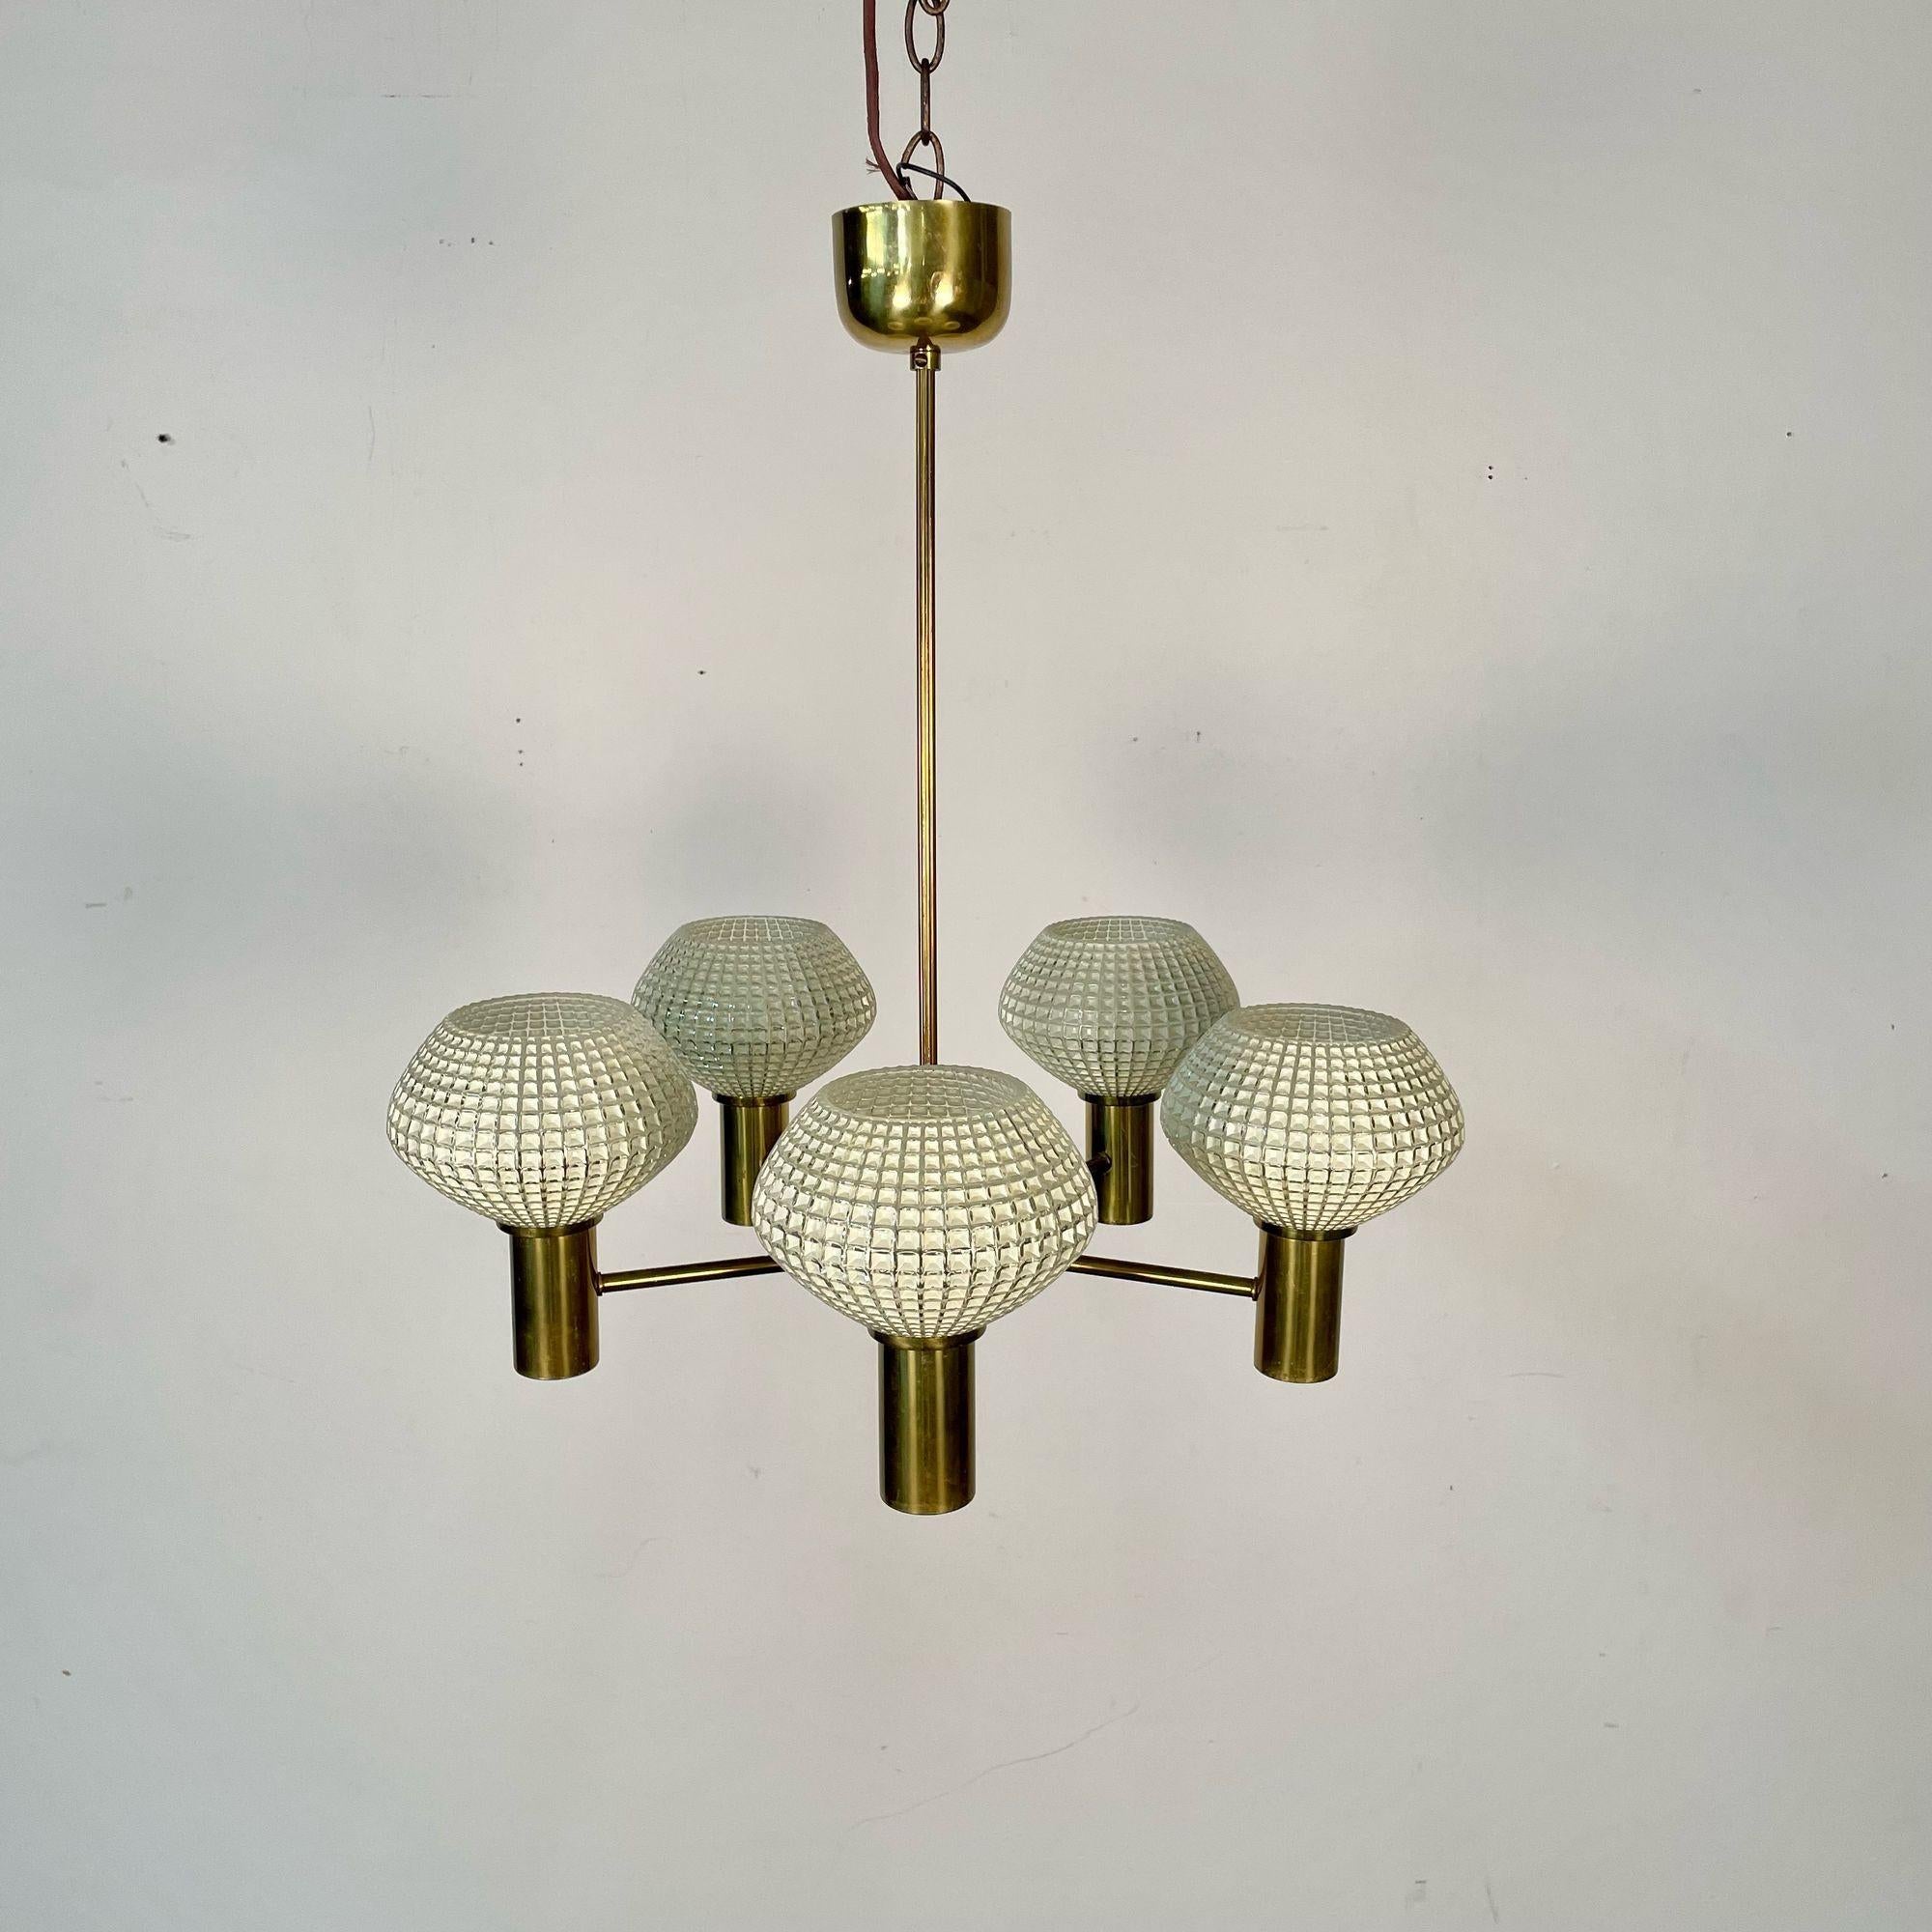 Mid-20th Century Swedish Mid-Century Modern Chandelier, Five Light, Brass and Textured Glass For Sale